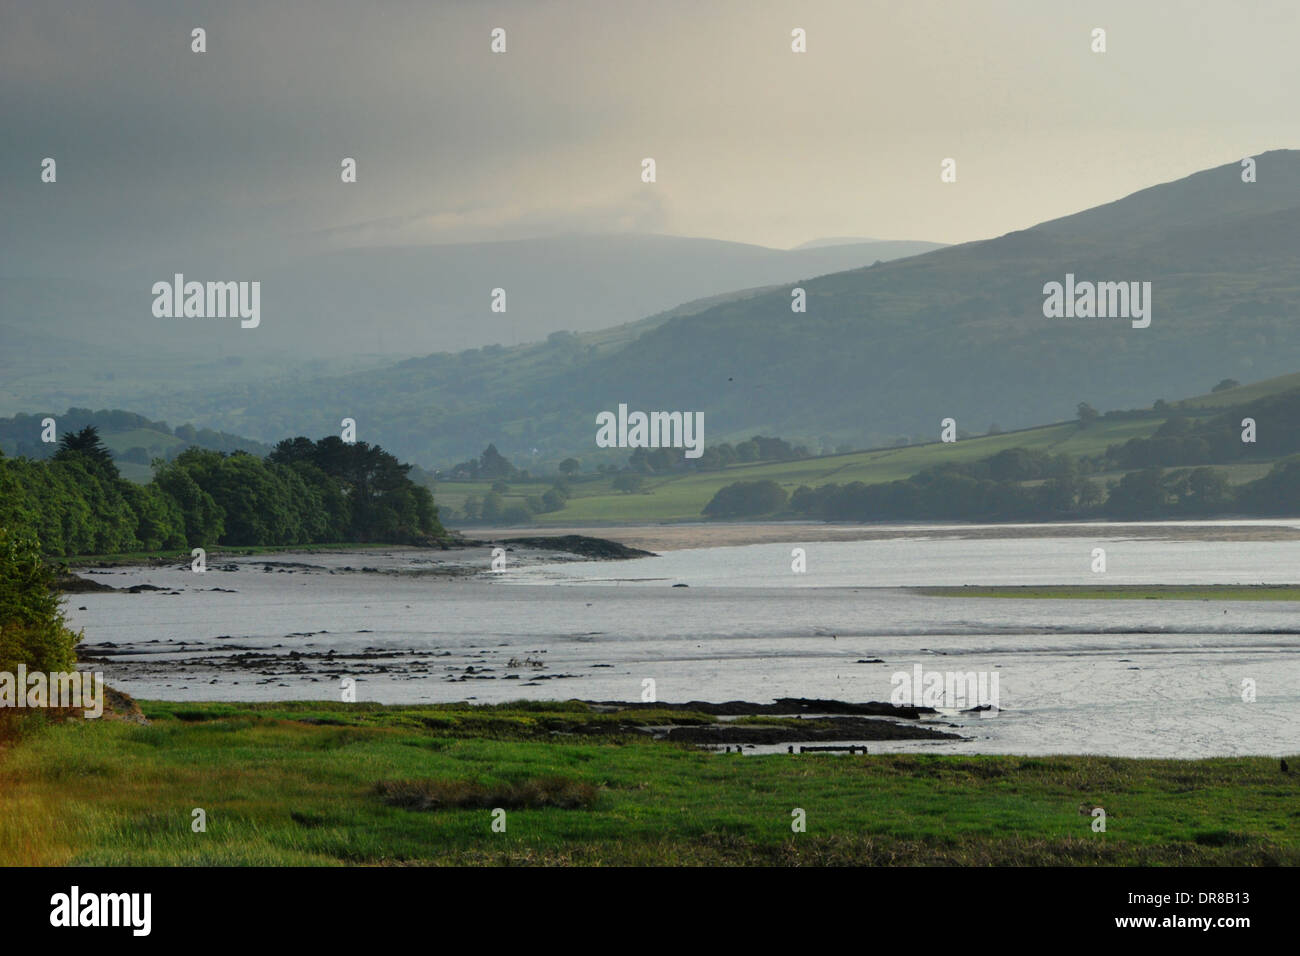 North Wales landscape with the River Conwy and Snowdonia hills Stock Photo